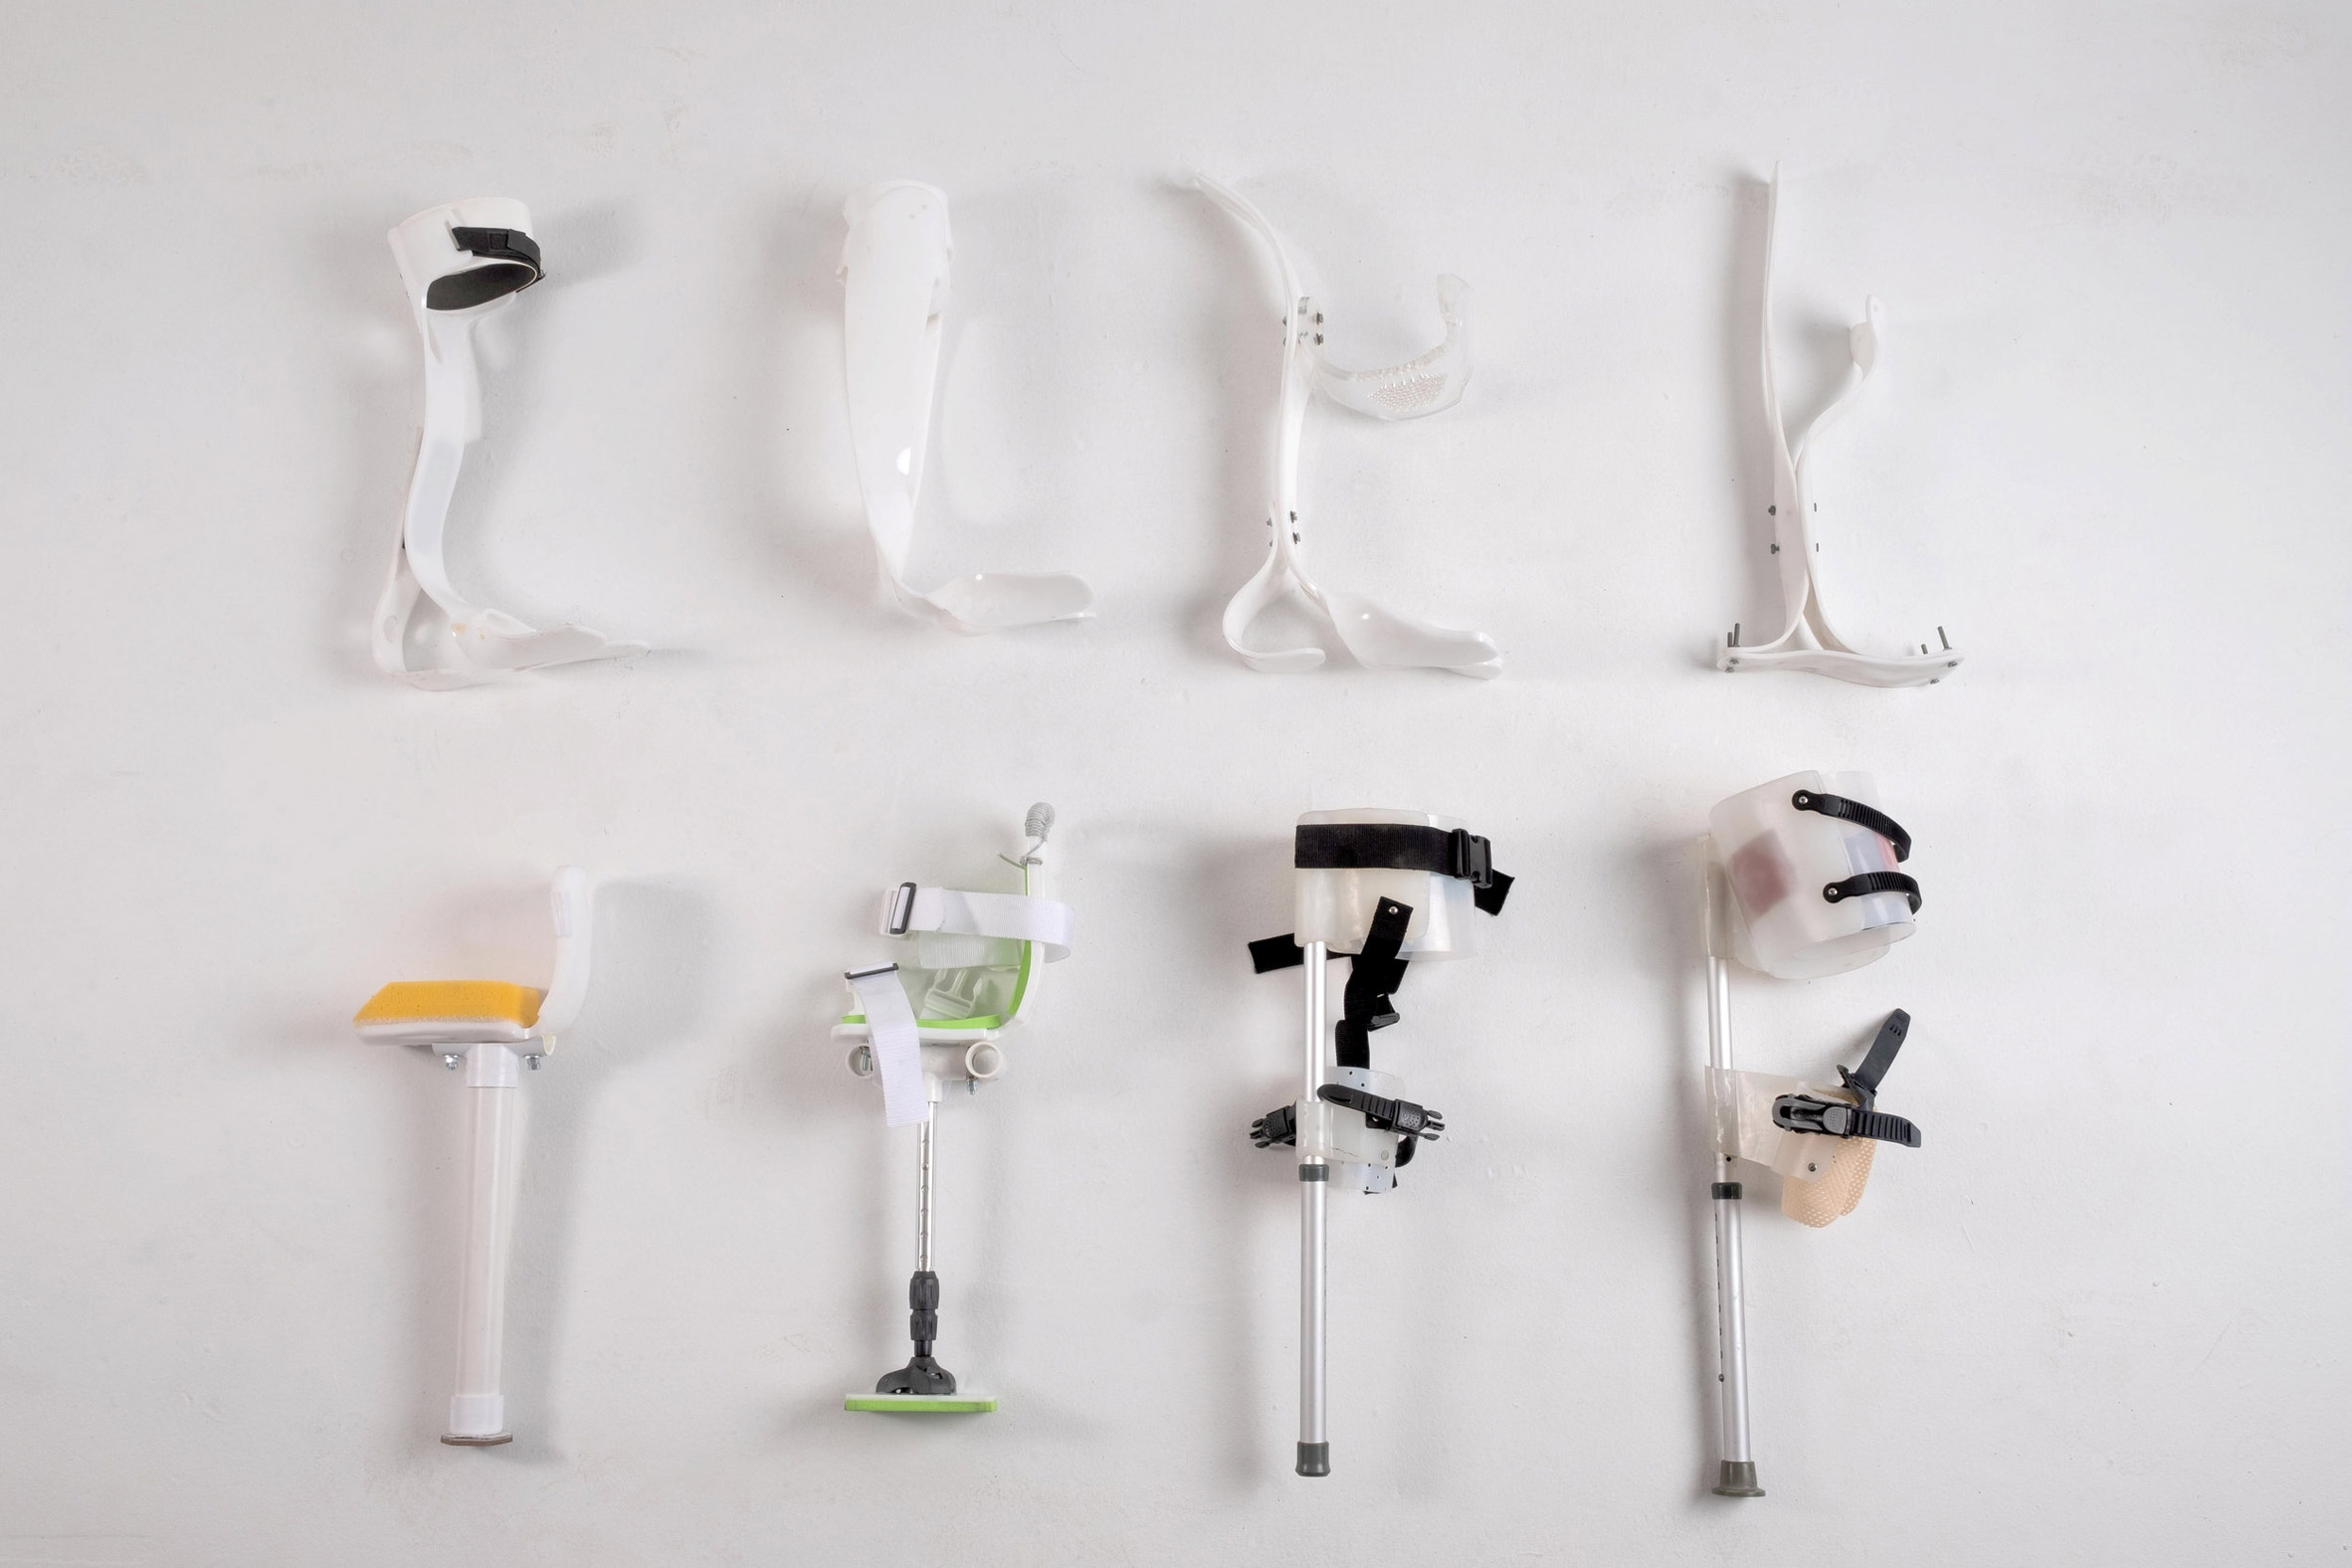 This modular prosthetic shower leg facilitates easy cleaning of